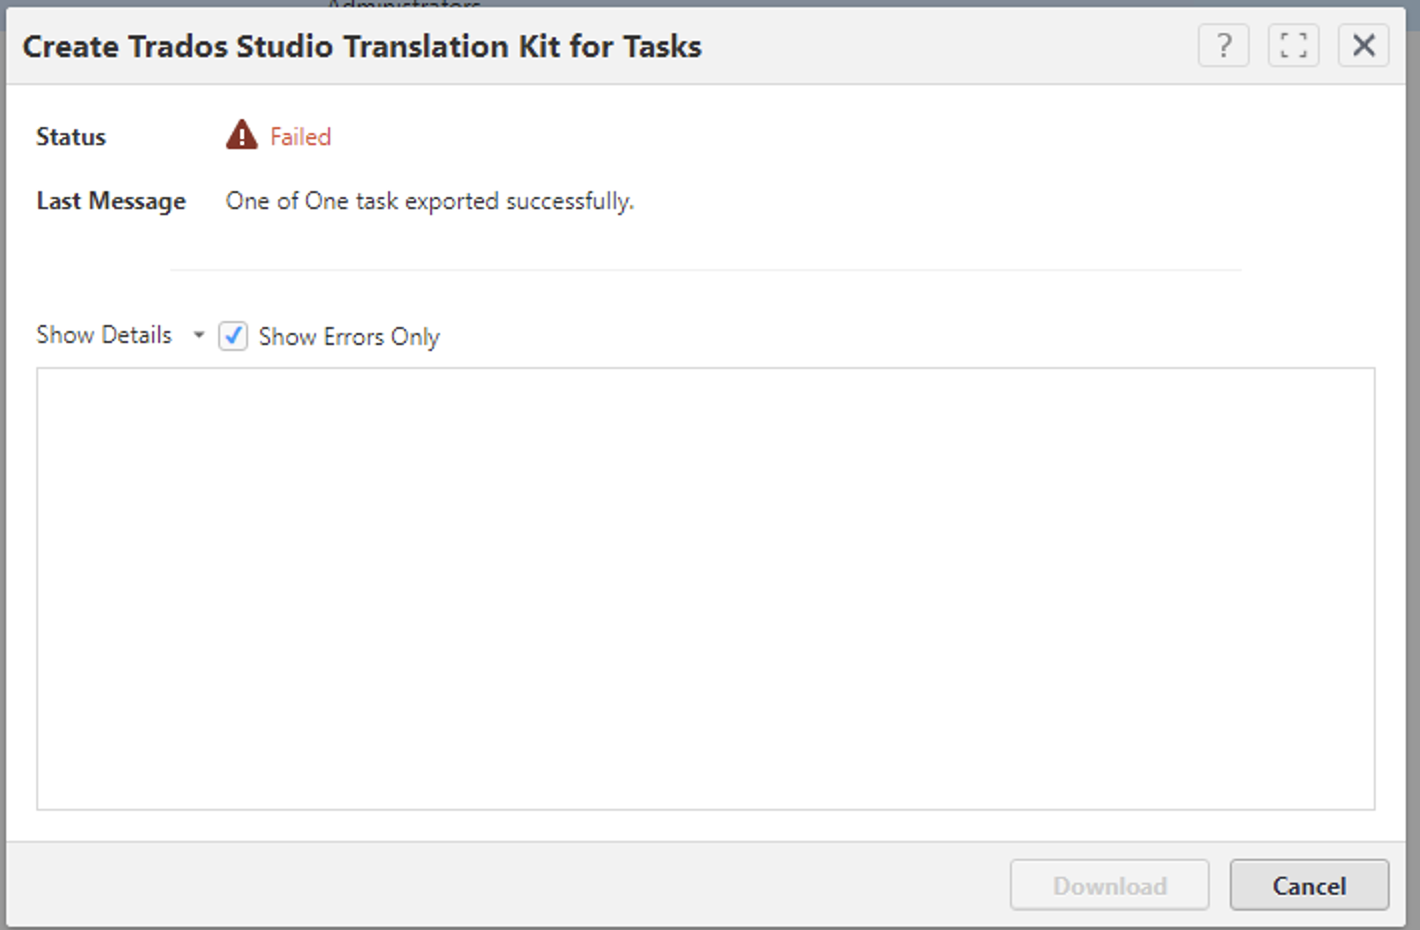 Screenshot of WorldServer's 'Create Trados Studio Translation Kit for Tasks' dialog box with a 'Failed' status and a contradictory success message stating 'One of One task exported successfully.'